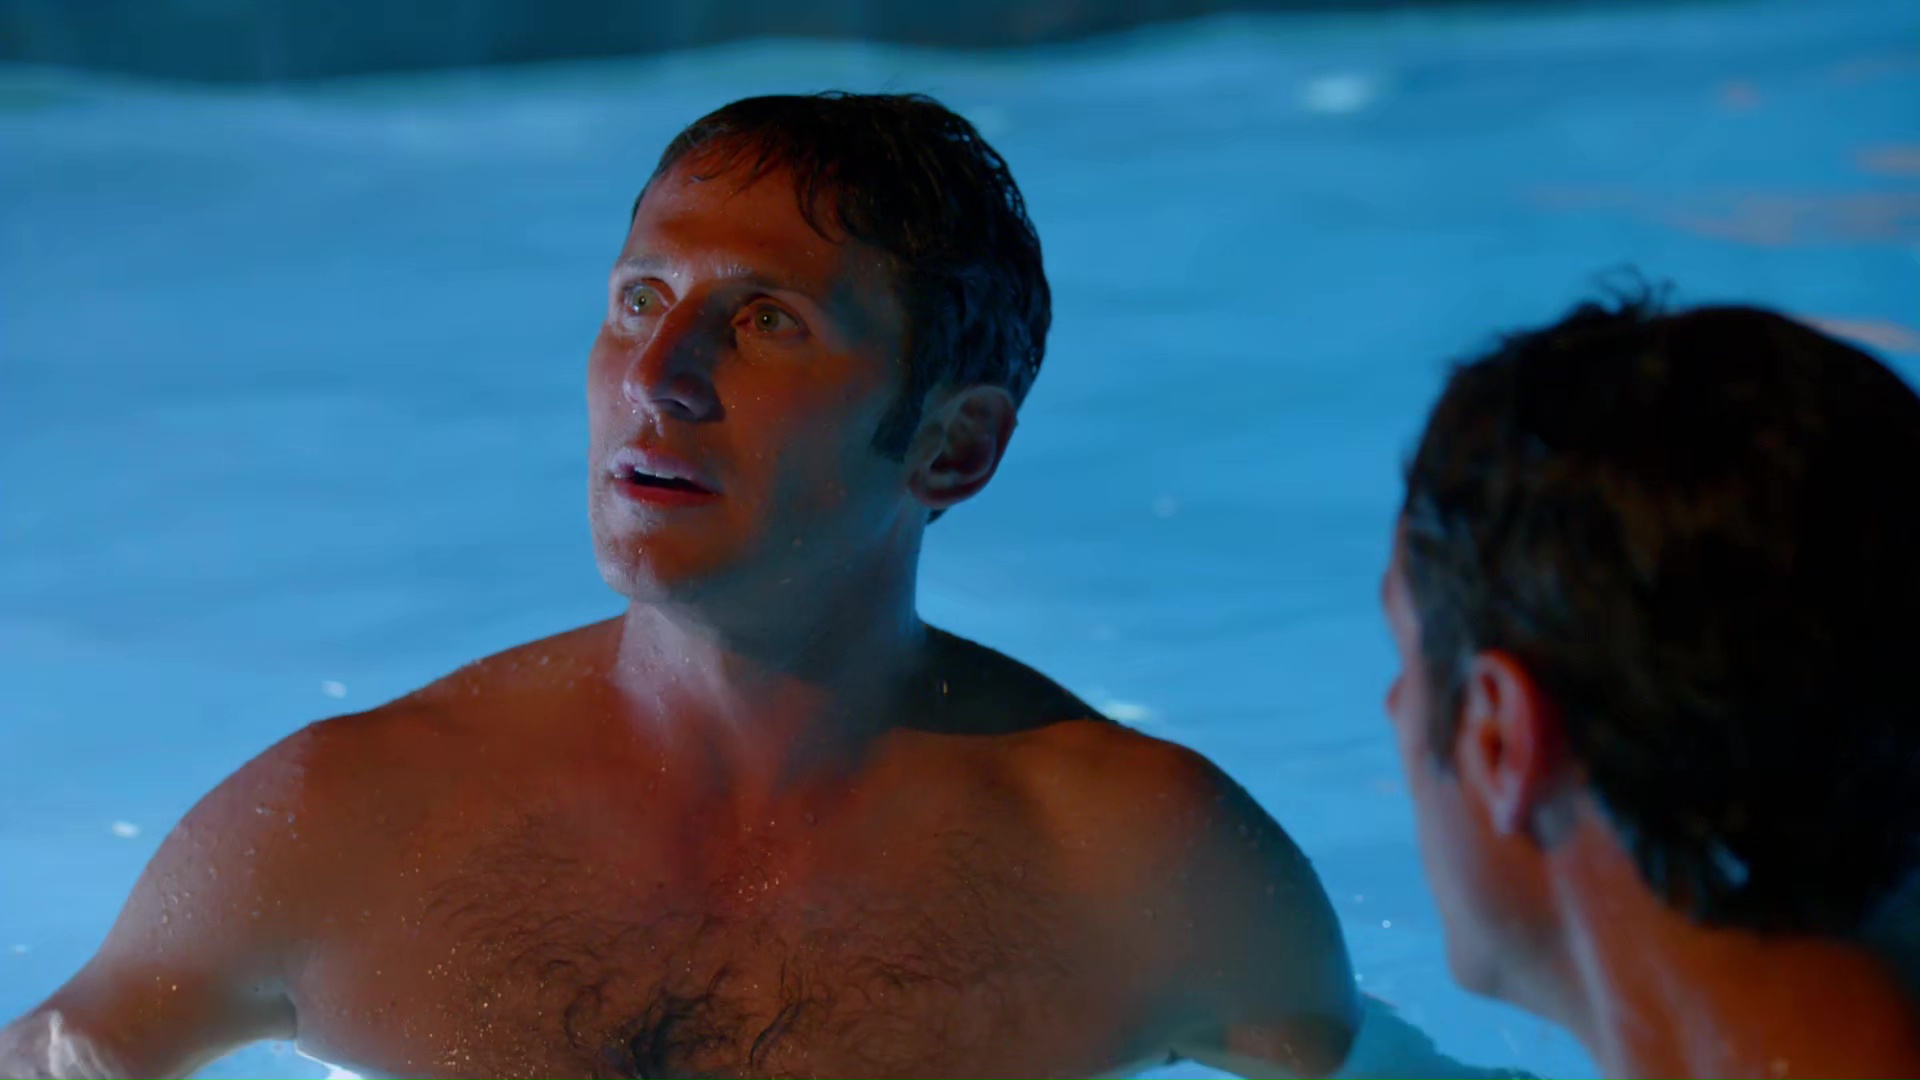 Mark Feuerstein and Paulo Costanzo shirtless in Royal Pains 6-07 "Elec...